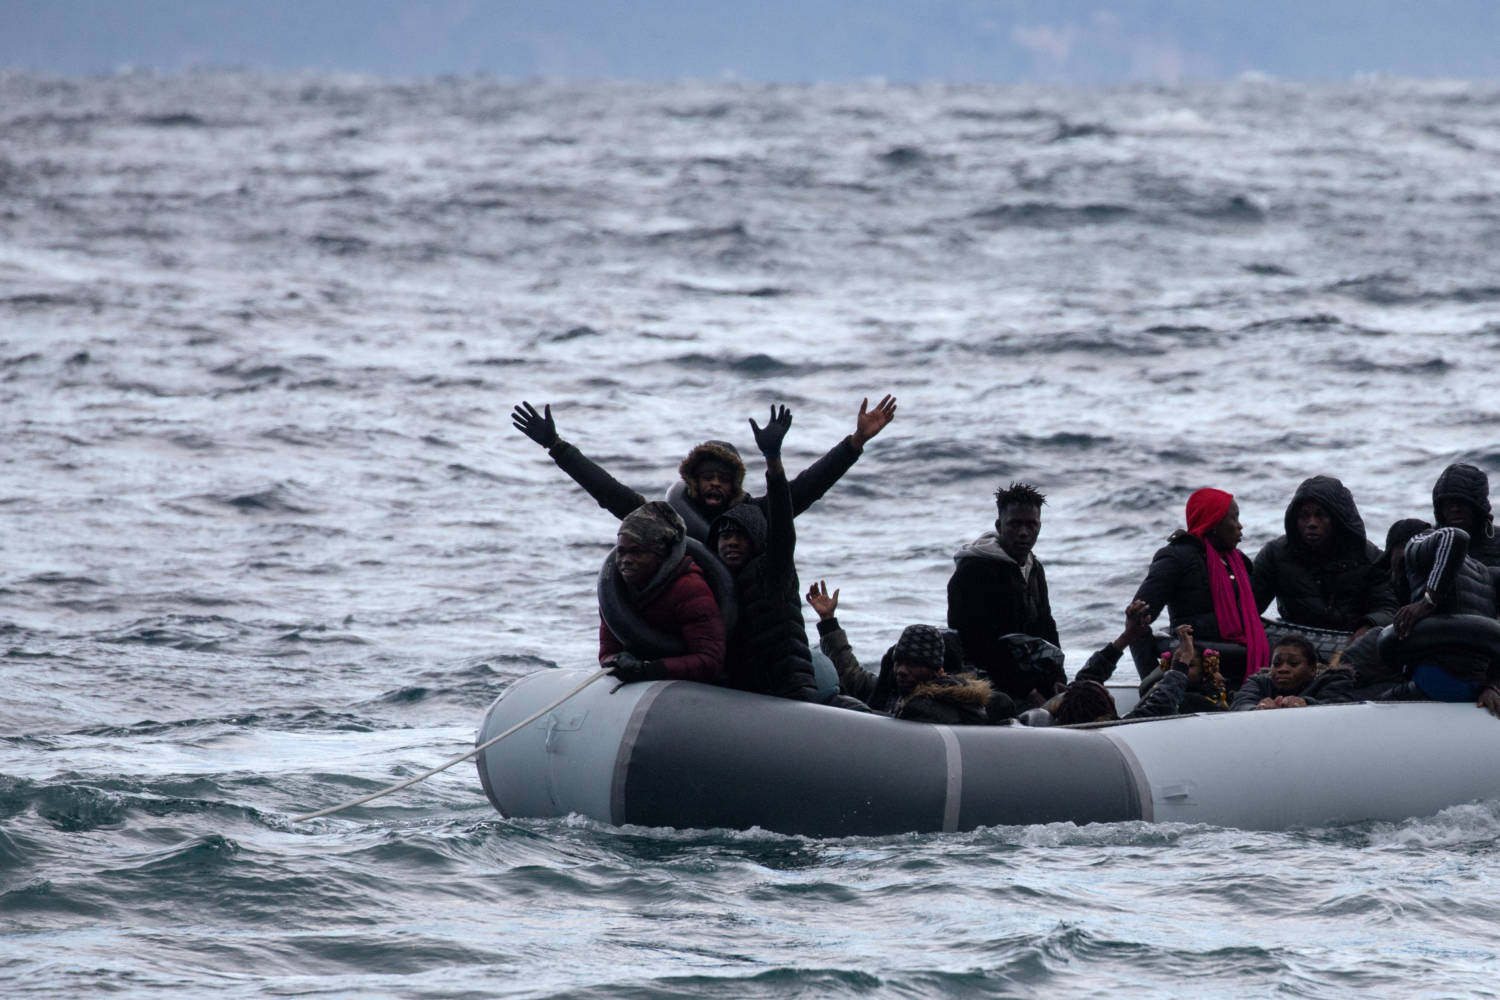 File Photo: Migrants From Sub Saharan African Countries On A Dinghy React As They Are Towed By A Rescue Boat During Their Effort To Cross Part Of The Aegean Sea From Turkey To The Island Of Lesbos